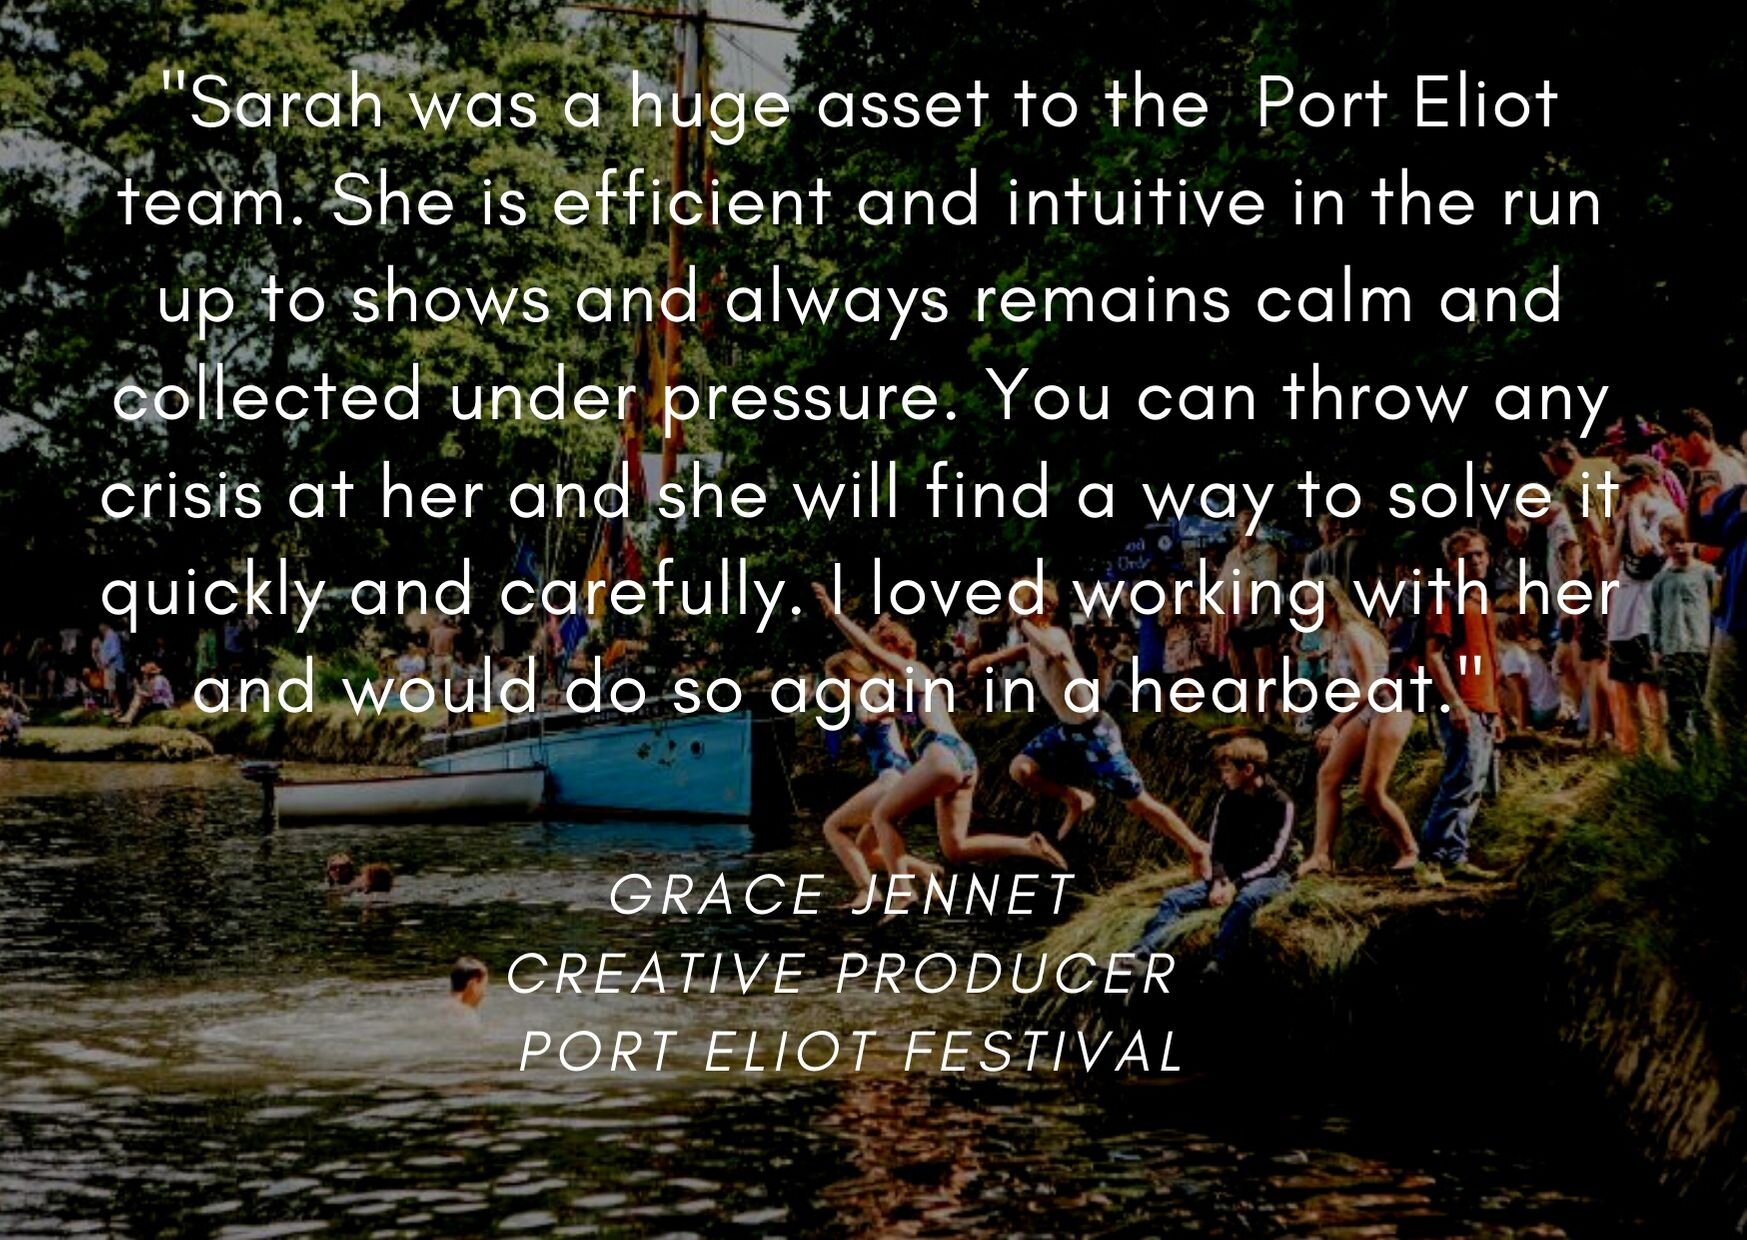 Sarah was a huge asset to the Port Eliot team. She is efficient and intuitive in the run up to shows and always remains calm and collected under pressure. You can throw any crisis at her and she will find a way to so-2.jpg